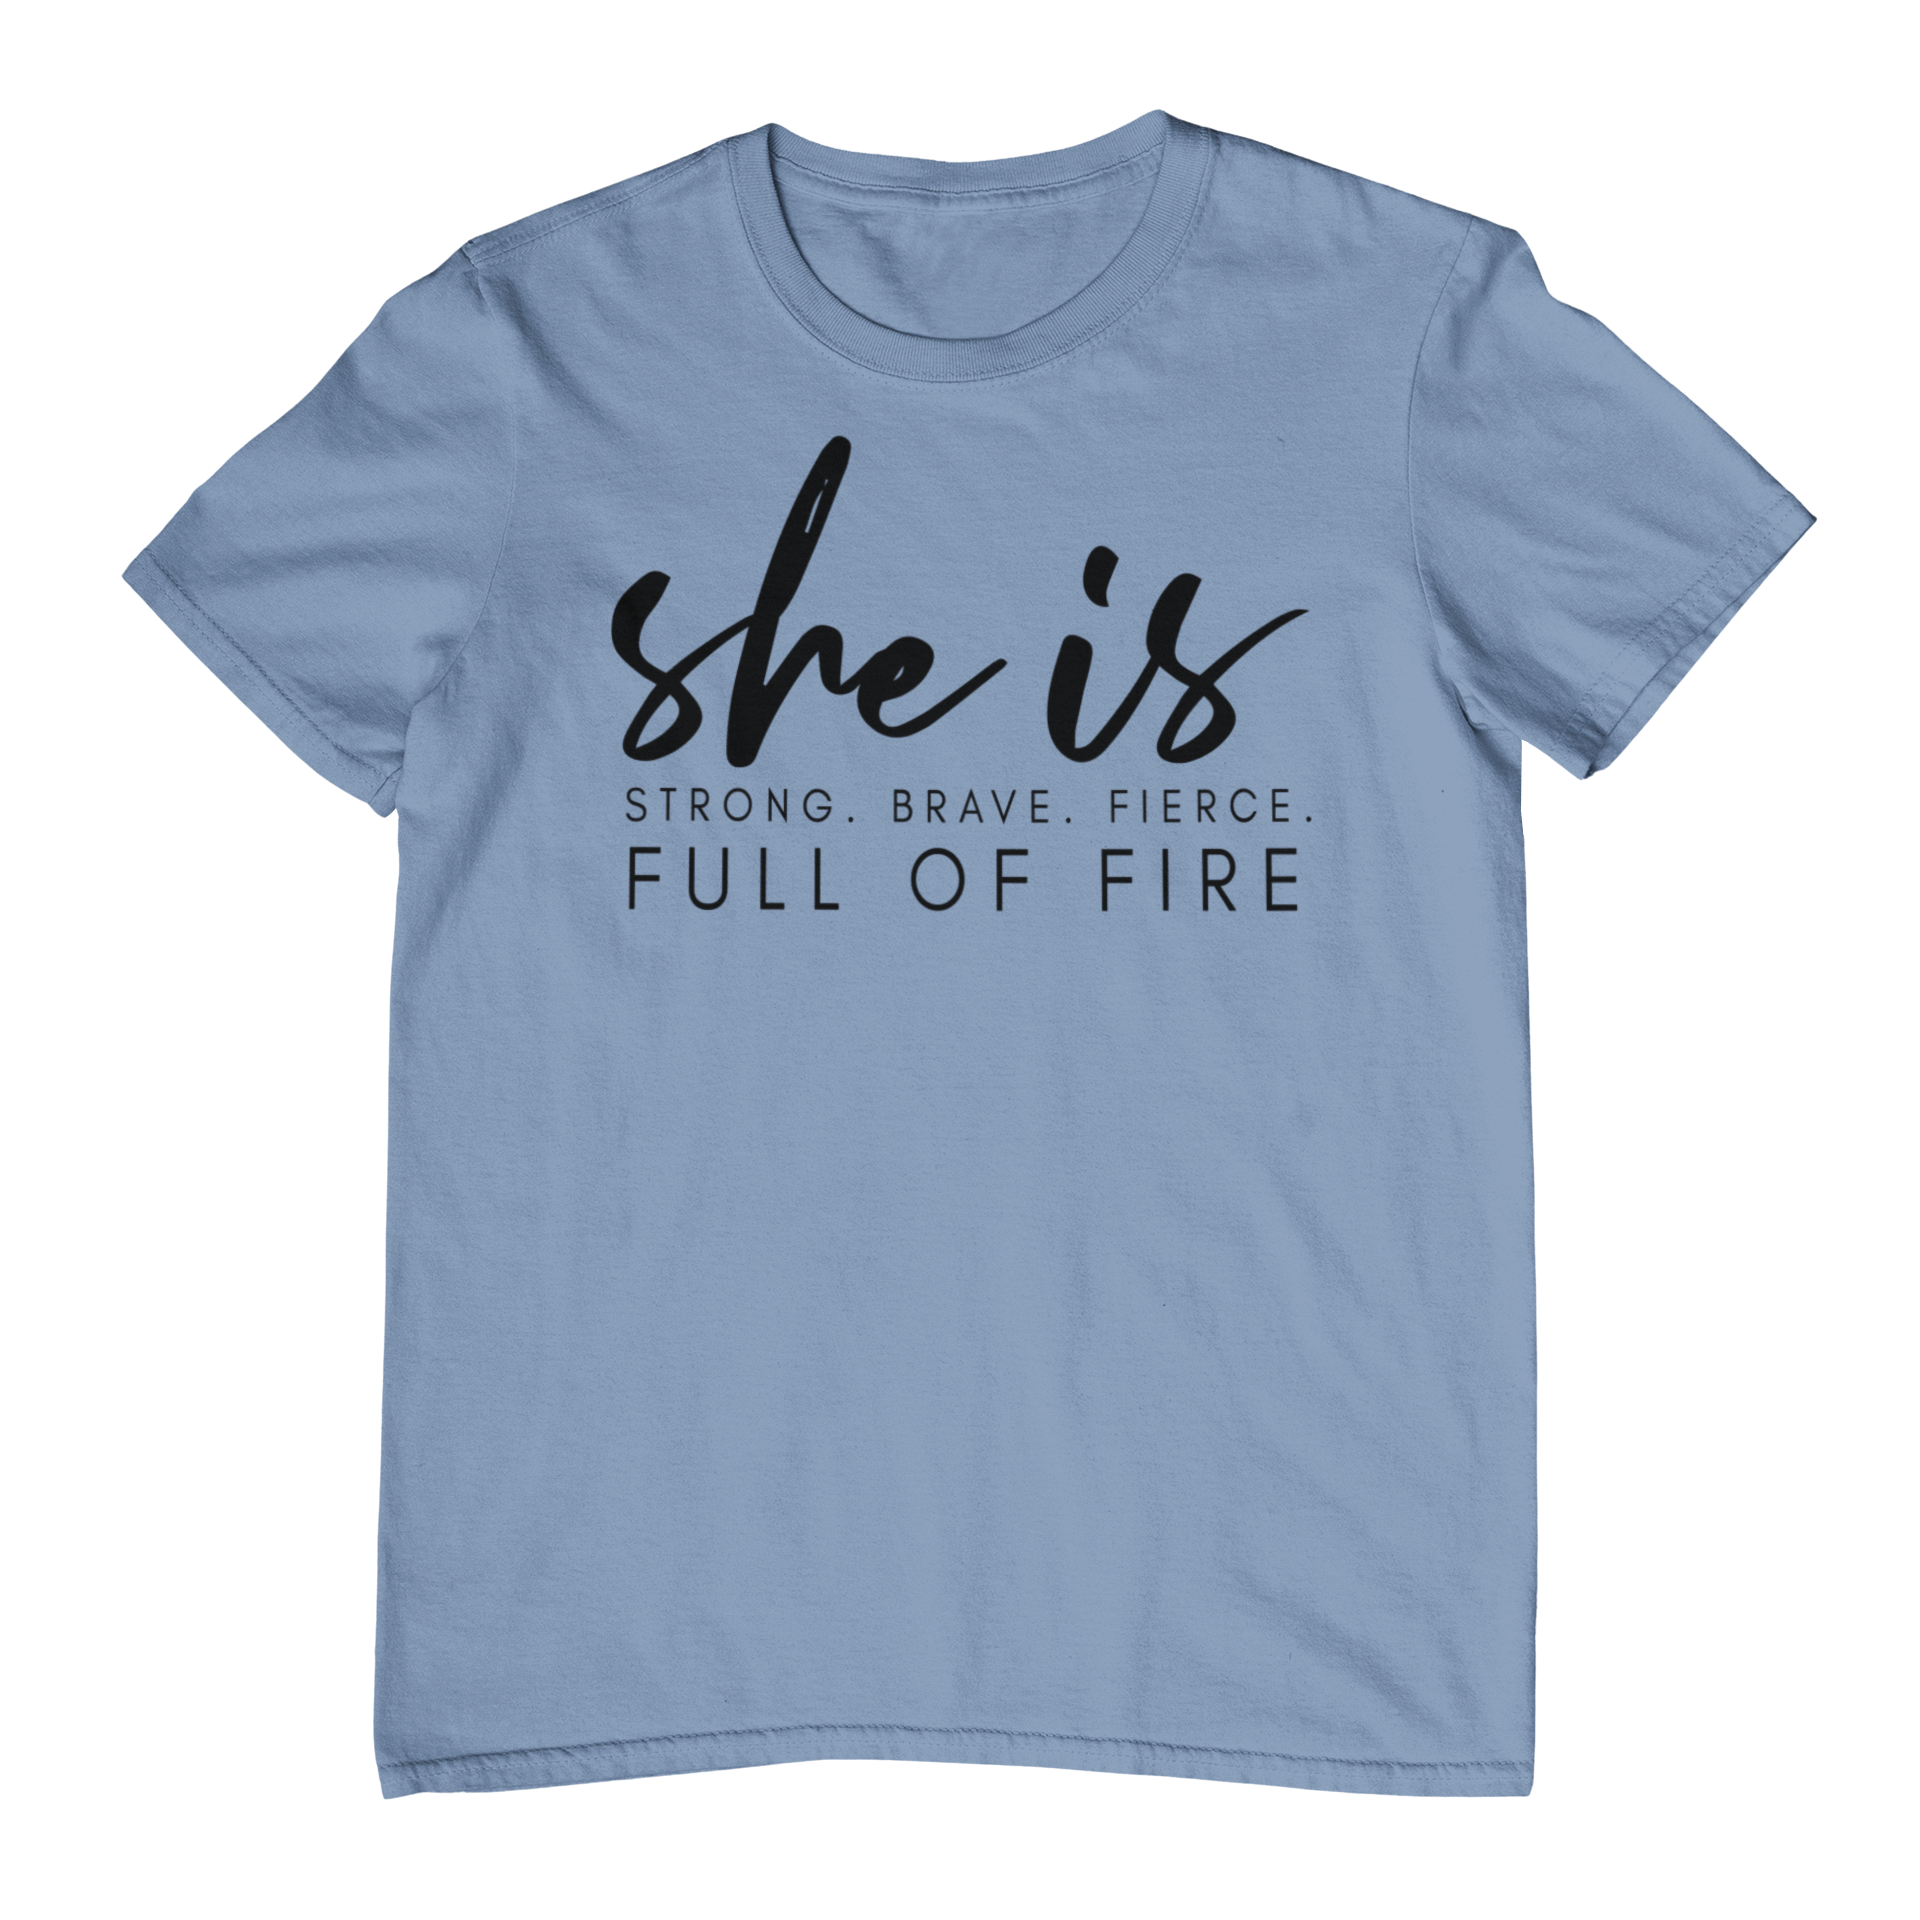 She is Full of Fire - Tshirt